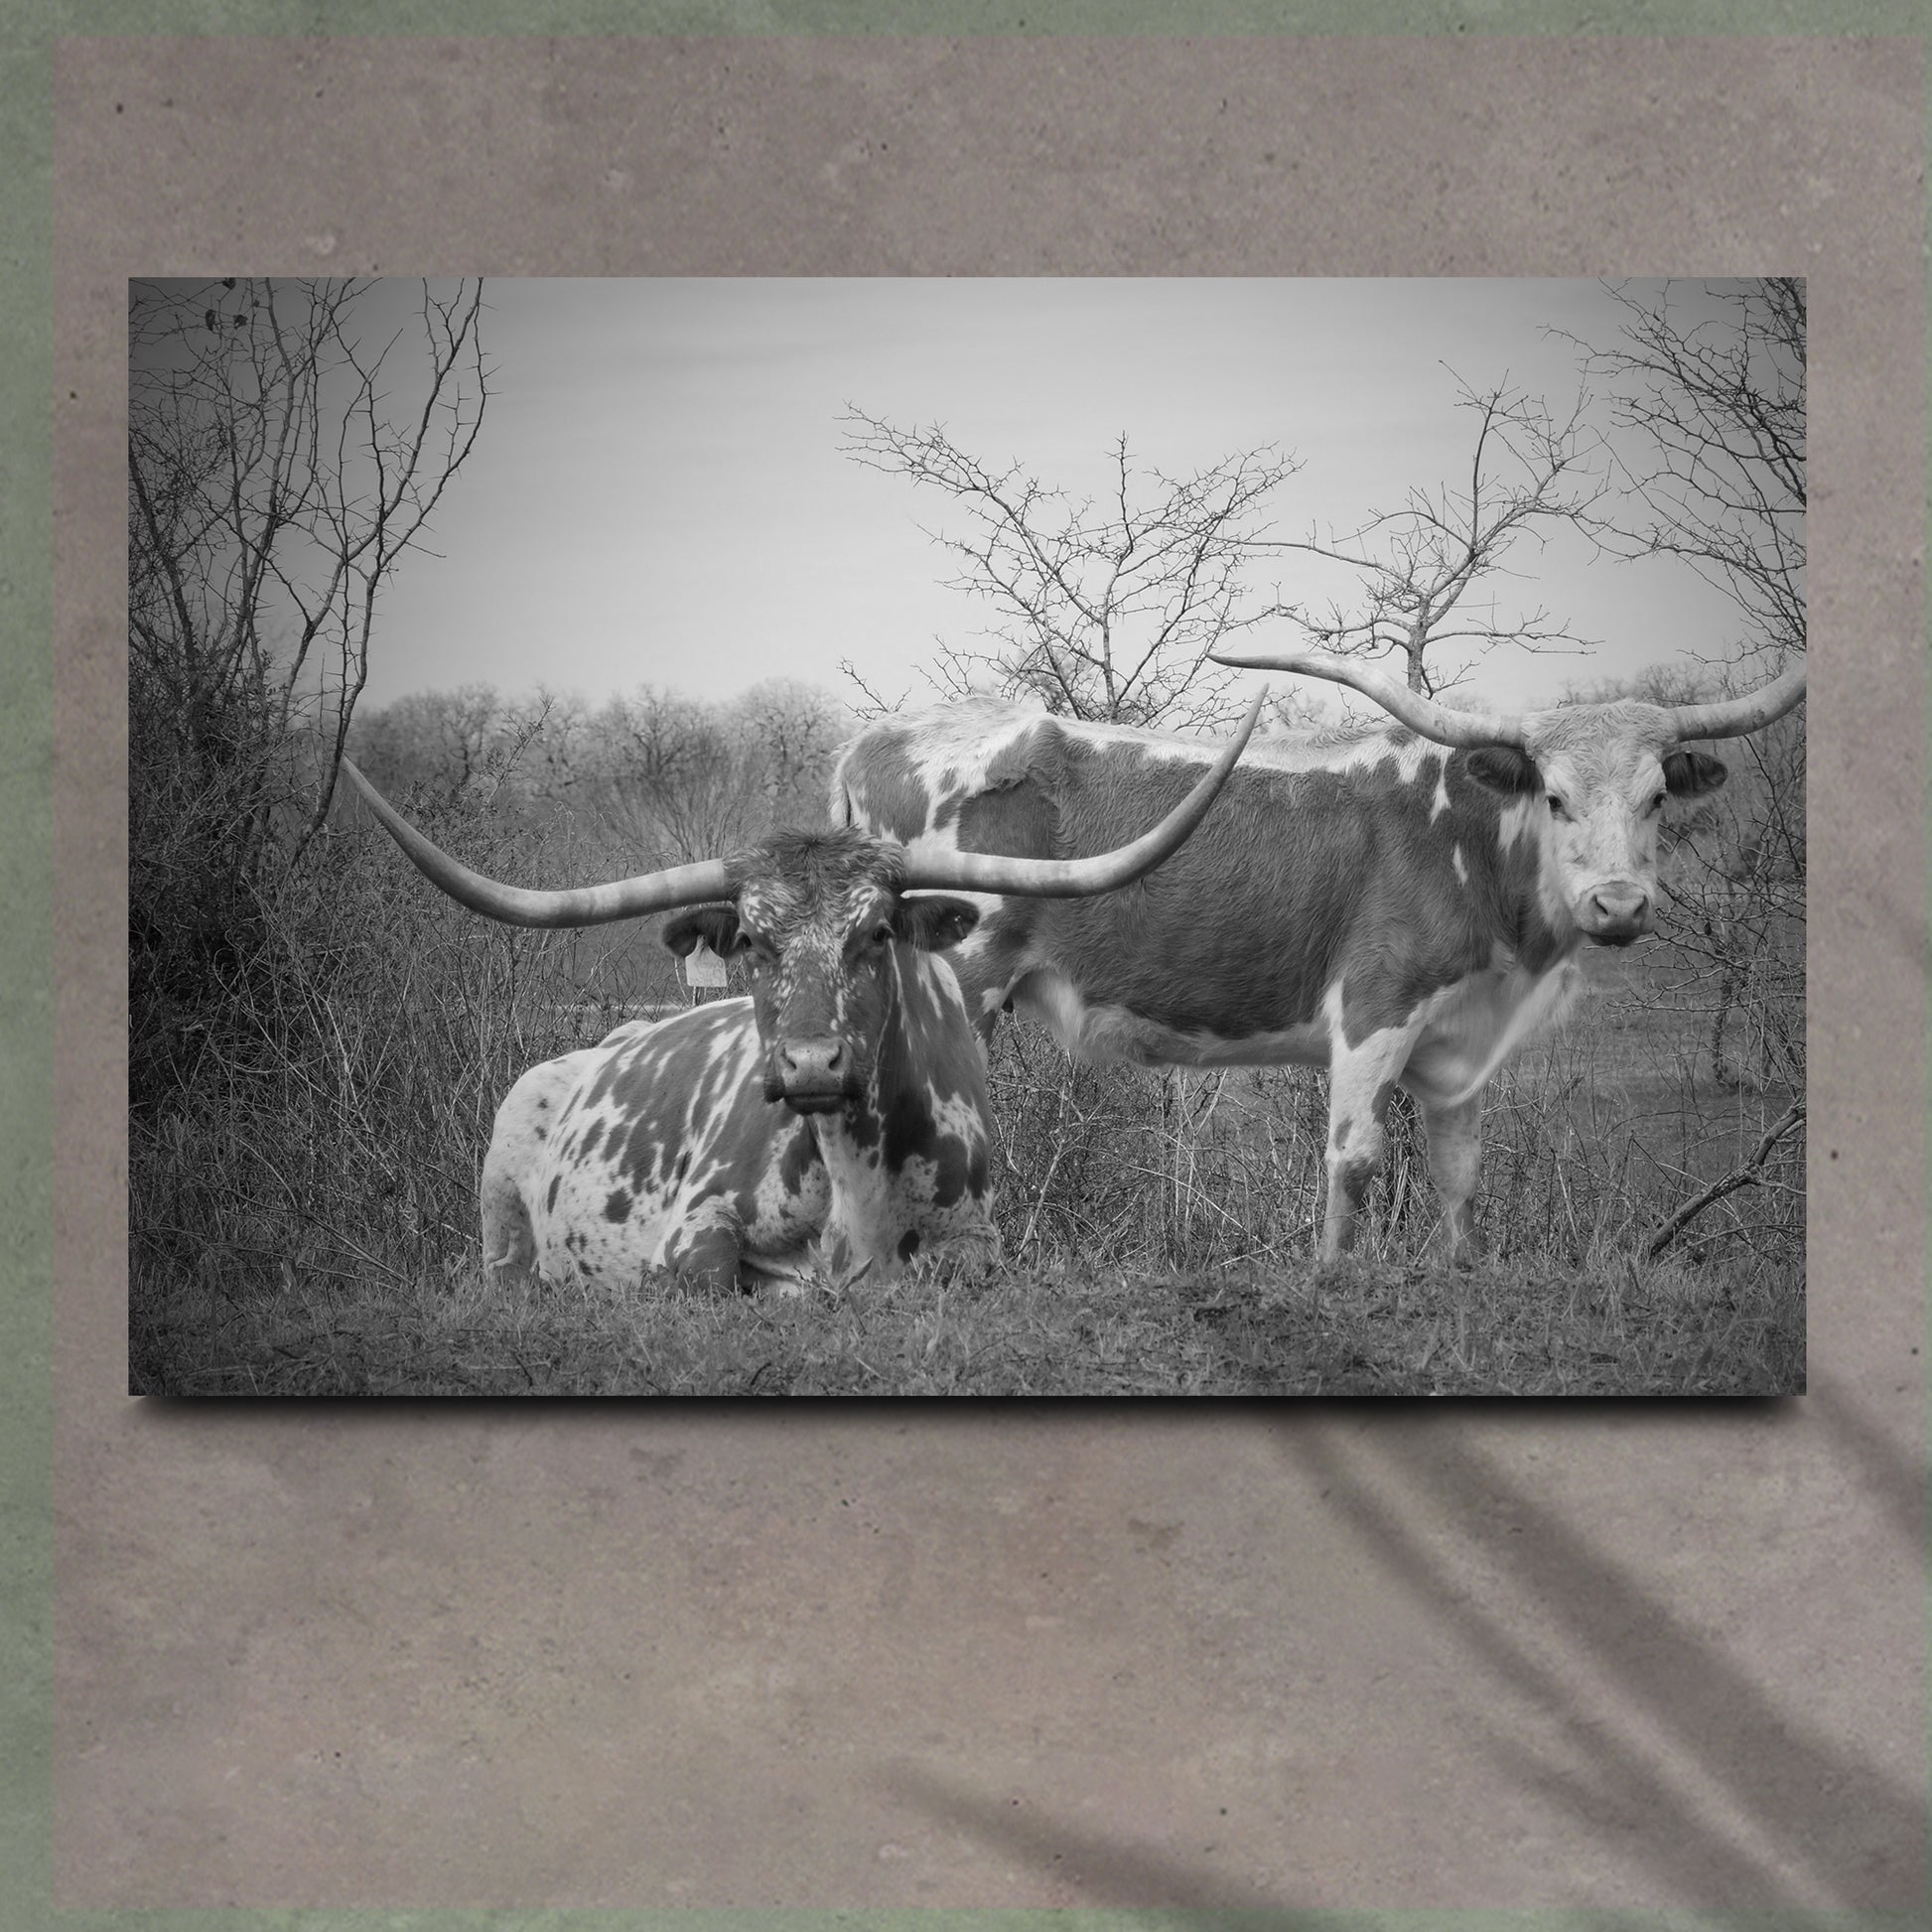 Monochrome Texas Longhorn Cattle Canvas Wall Art - Image by Tailored Canvases